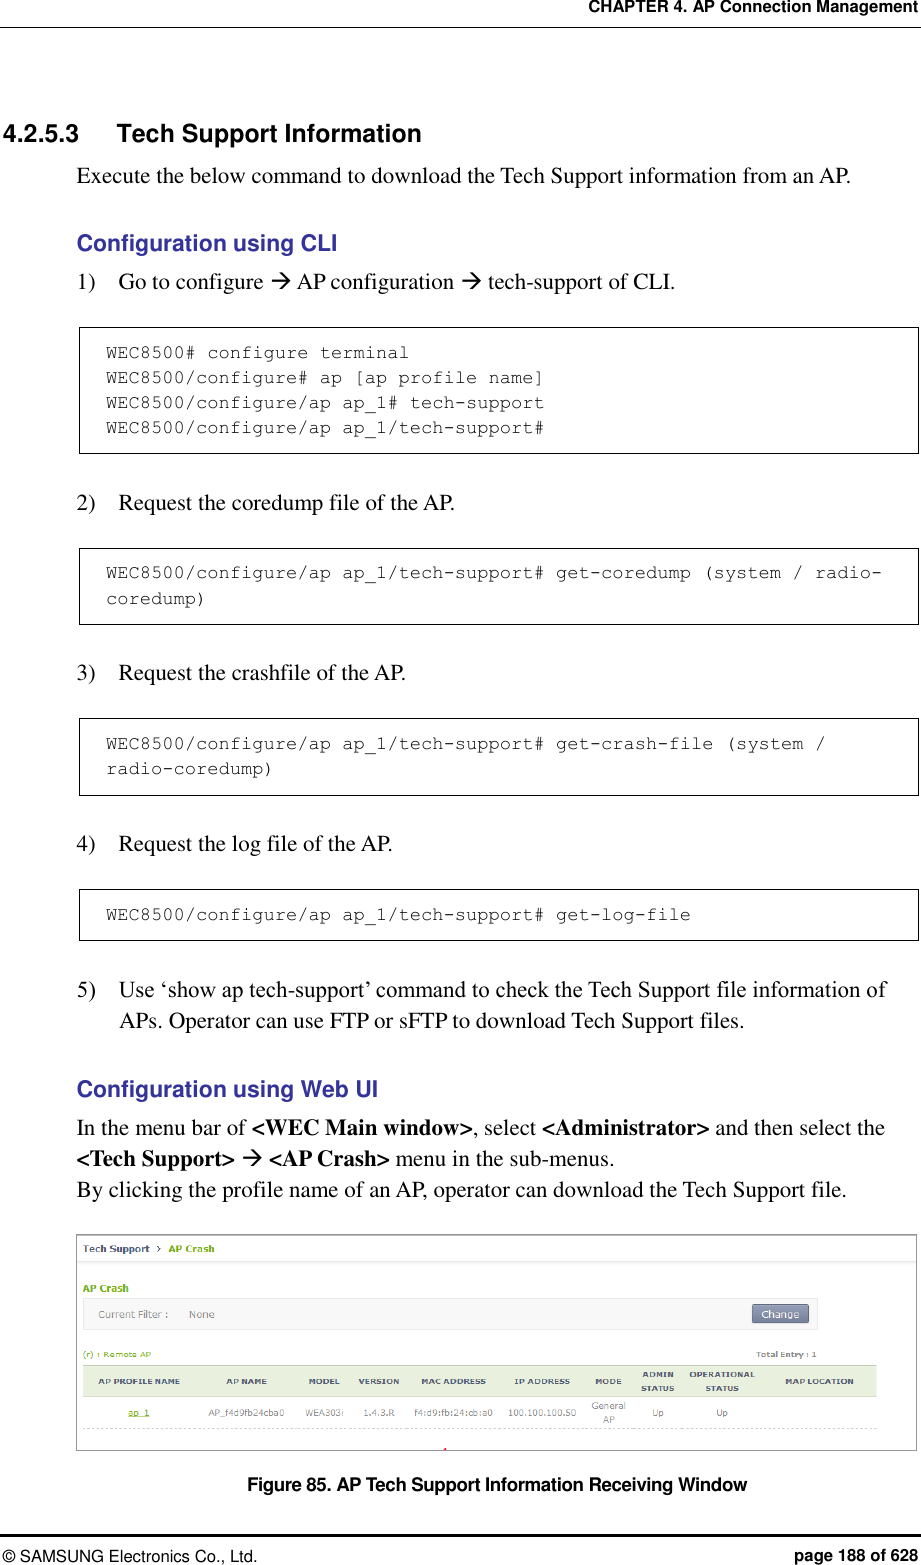 CHAPTER 4. AP Connection Management ©  SAMSUNG Electronics Co., Ltd.  page 188 of 628 4.2.5.3  Tech Support Information Execute the below command to download the Tech Support information from an AP.  Configuration using CLI 1)    Go to configure  AP configuration  tech-support of CLI.  WEC8500# configure terminal WEC8500/configure# ap [ap profile name] WEC8500/configure/ap ap_1# tech-support WEC8500/configure/ap ap_1/tech-support#  2)    Request the coredump file of the AP.  WEC8500/configure/ap ap_1/tech-support# get-coredump (system / radio-coredump)  3)    Request the crashfile of the AP.  WEC8500/configure/ap ap_1/tech-support# get-crash-file (system / radio-coredump)  4)    Request the log file of the AP.  WEC8500/configure/ap ap_1/tech-support# get-log-file  5)    Use ‘show ap tech-support’ command to check the Tech Support file information of APs. Operator can use FTP or sFTP to download Tech Support files.  Configuration using Web UI In the menu bar of &lt;WEC Main window&gt;, select &lt;Administrator&gt; and then select the &lt;Tech Support&gt;  &lt;AP Crash&gt; menu in the sub-menus.   By clicking the profile name of an AP, operator can download the Tech Support file.  Figure 85. AP Tech Support Information Receiving Window 